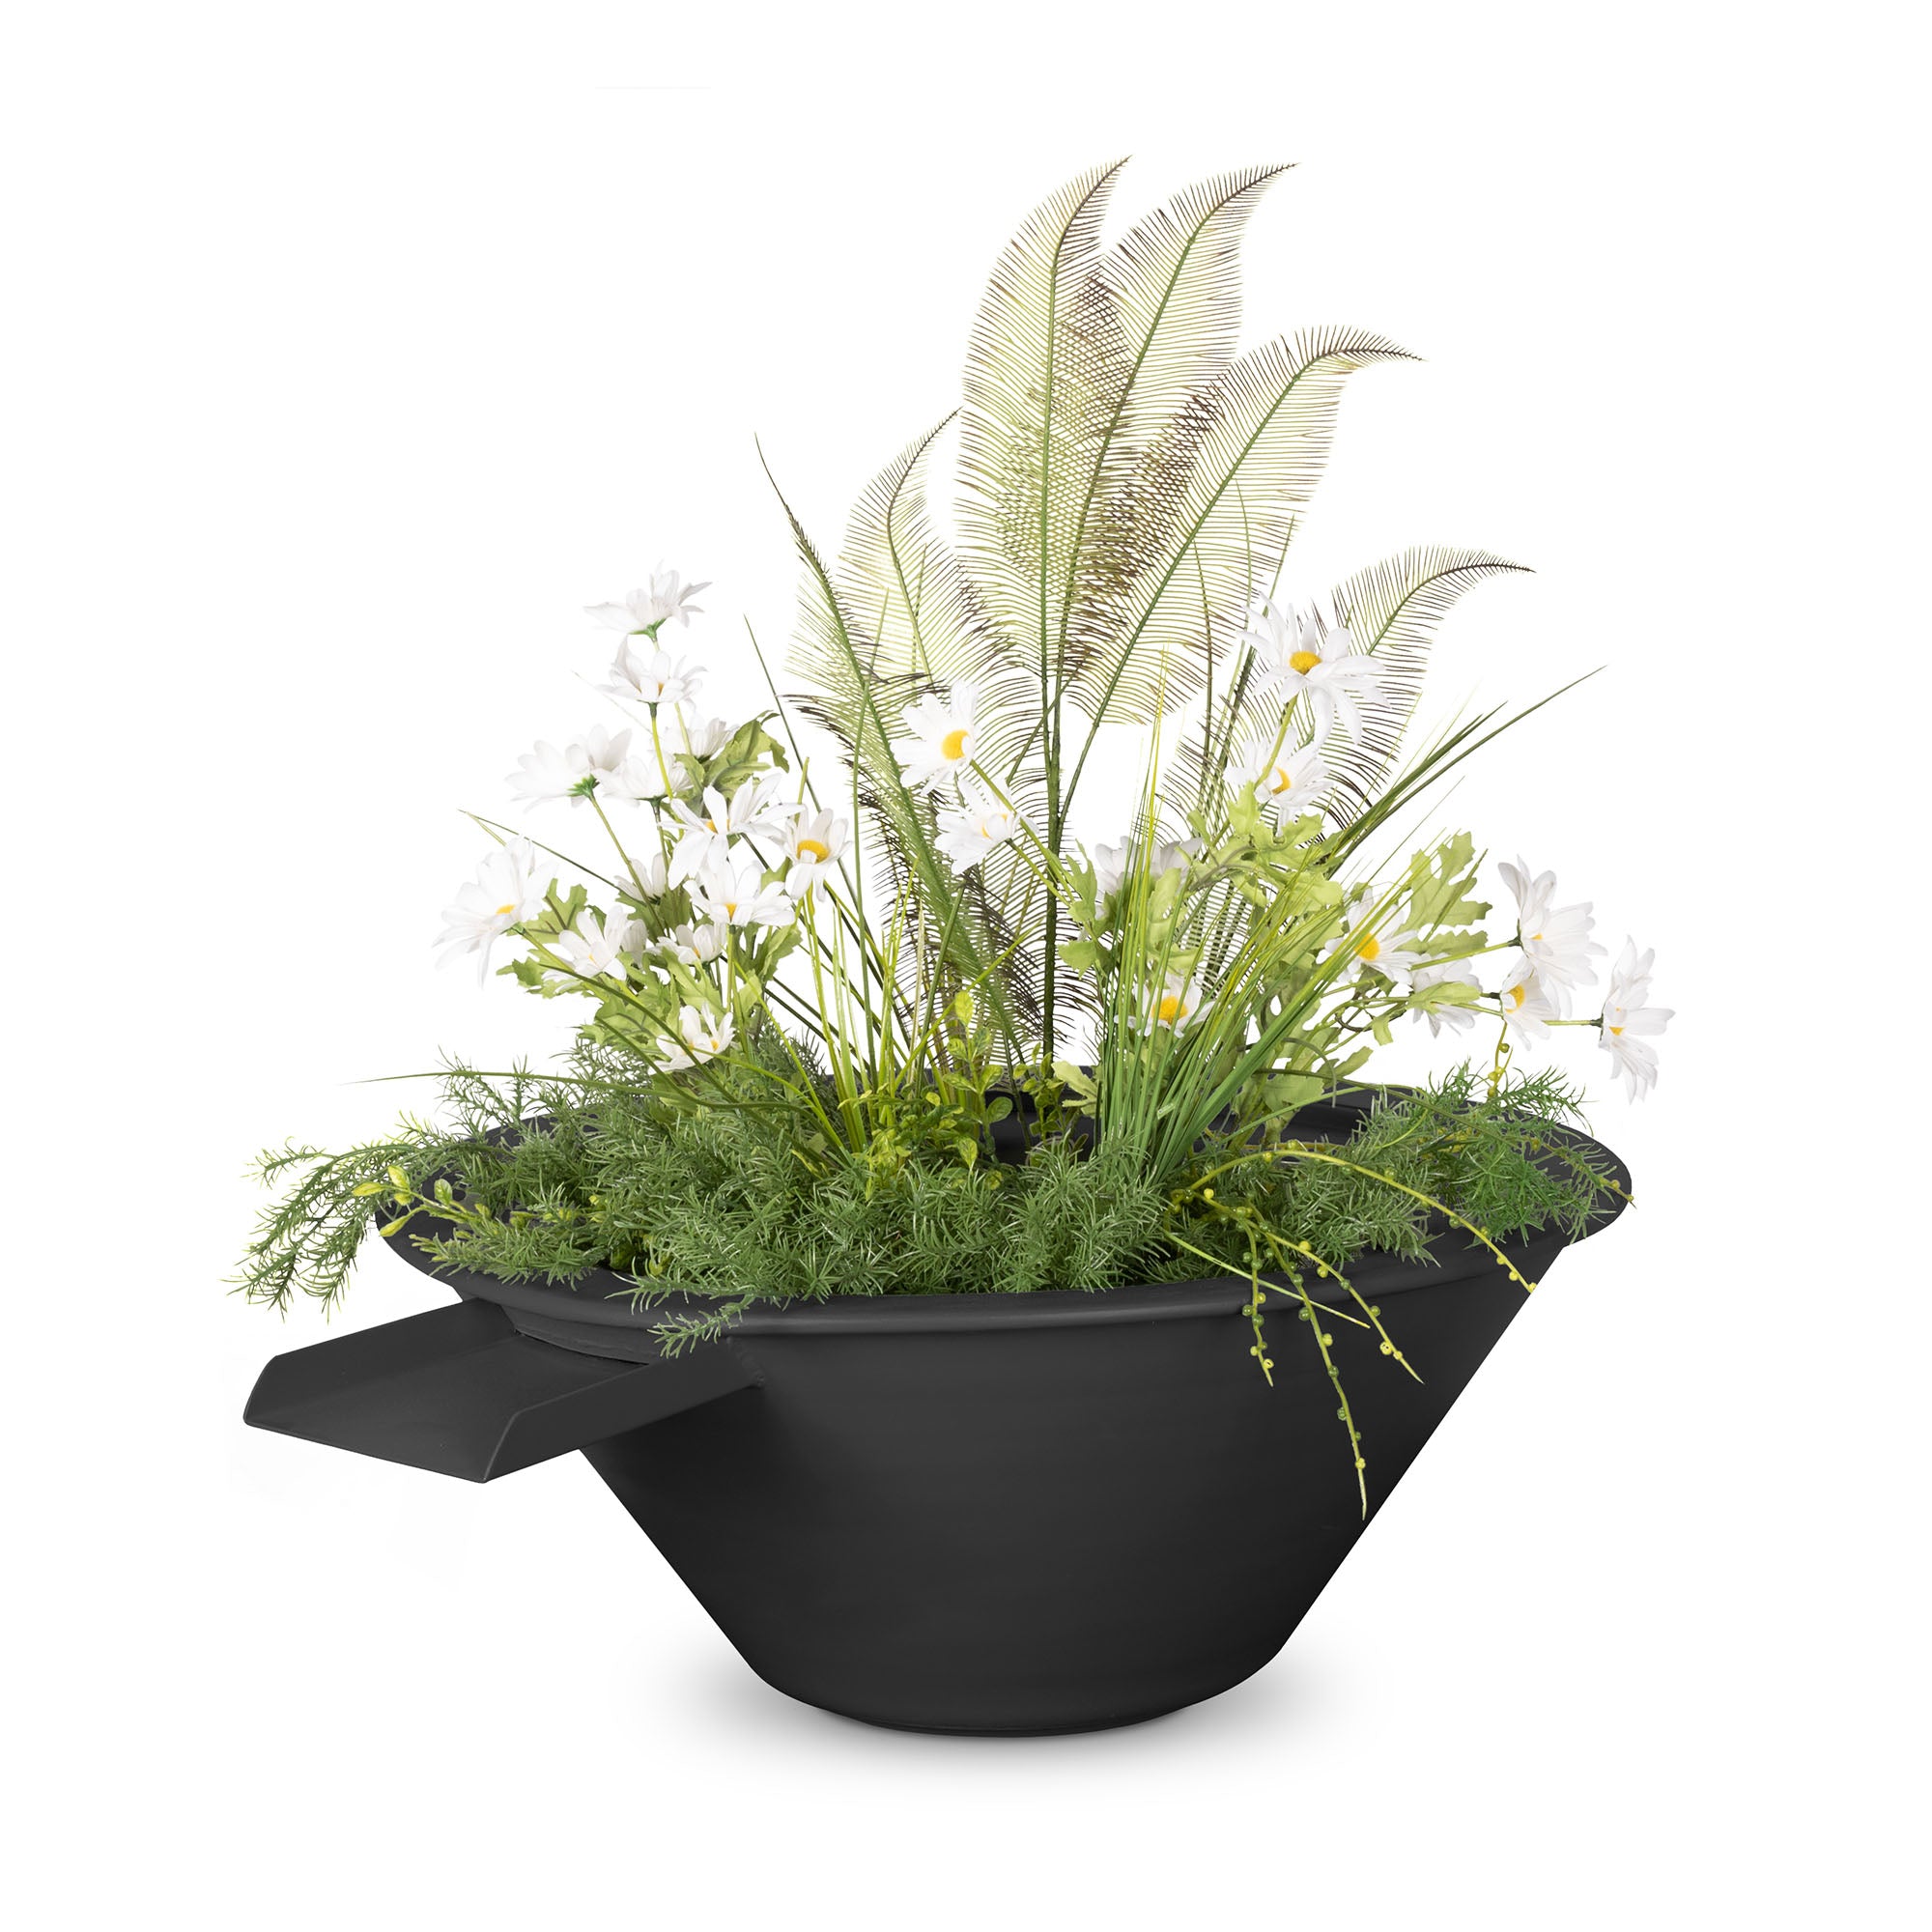 The Outdoor Plus Cazo Planter & Water Bowl Powder Coated Metal OPT-RXXPCPW - Serenity Provision